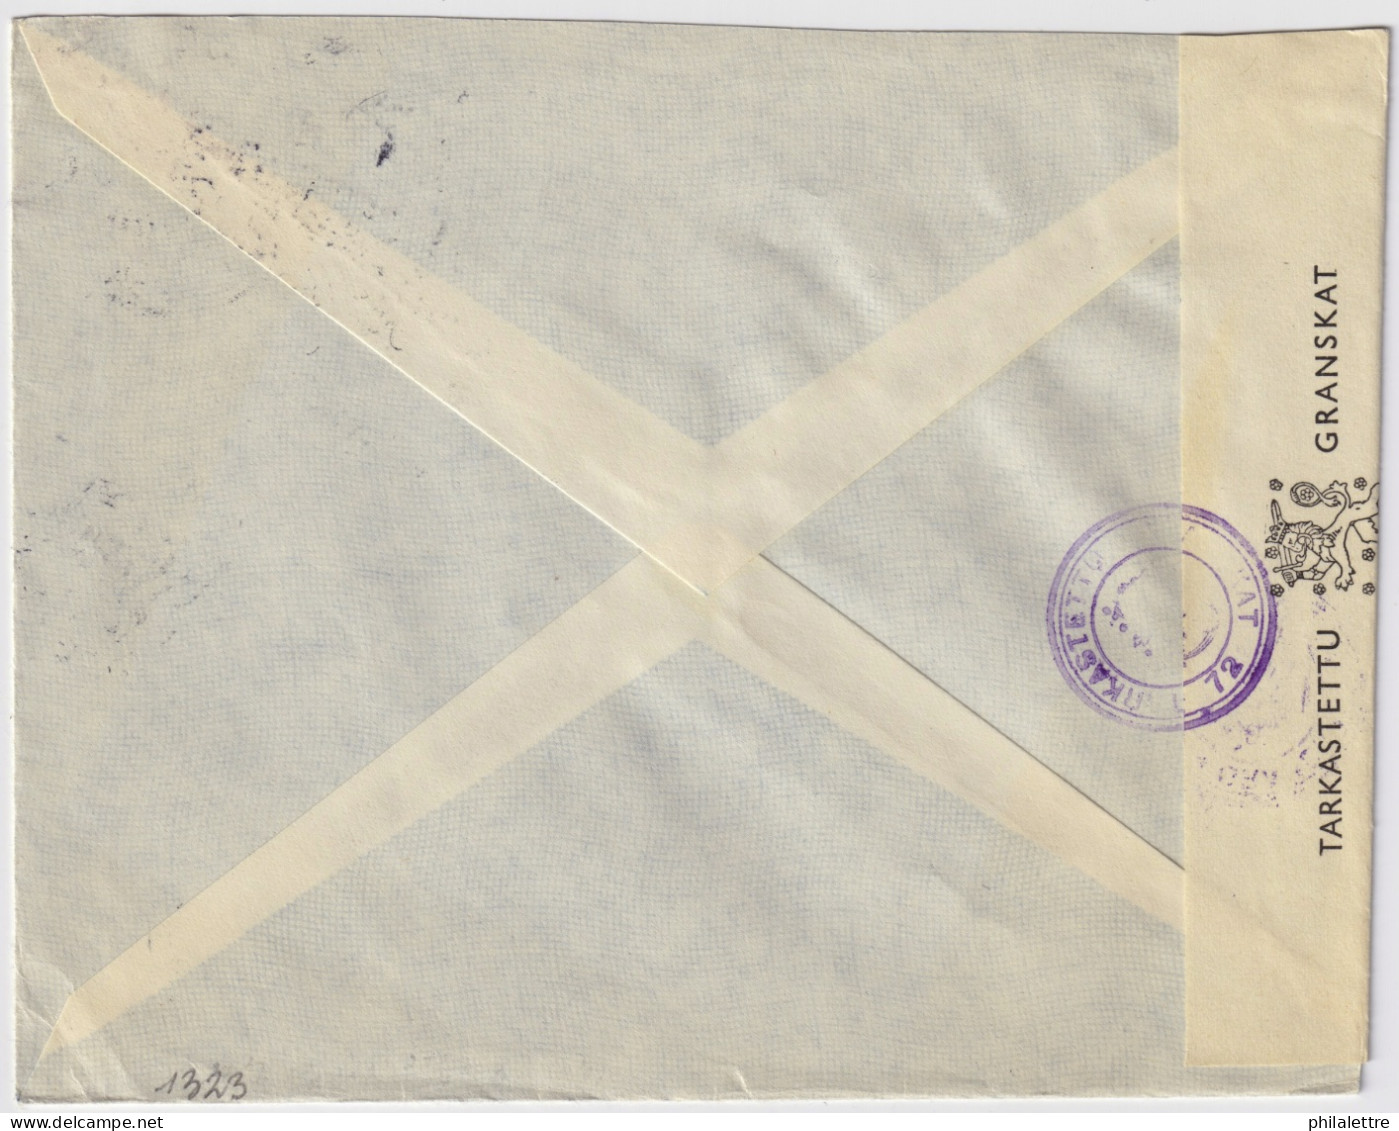 FINLAND - 1942 - Censored Cover From JACOBSTAD To Stockholm, Sweden Franked 2.75Mk - Cartas & Documentos